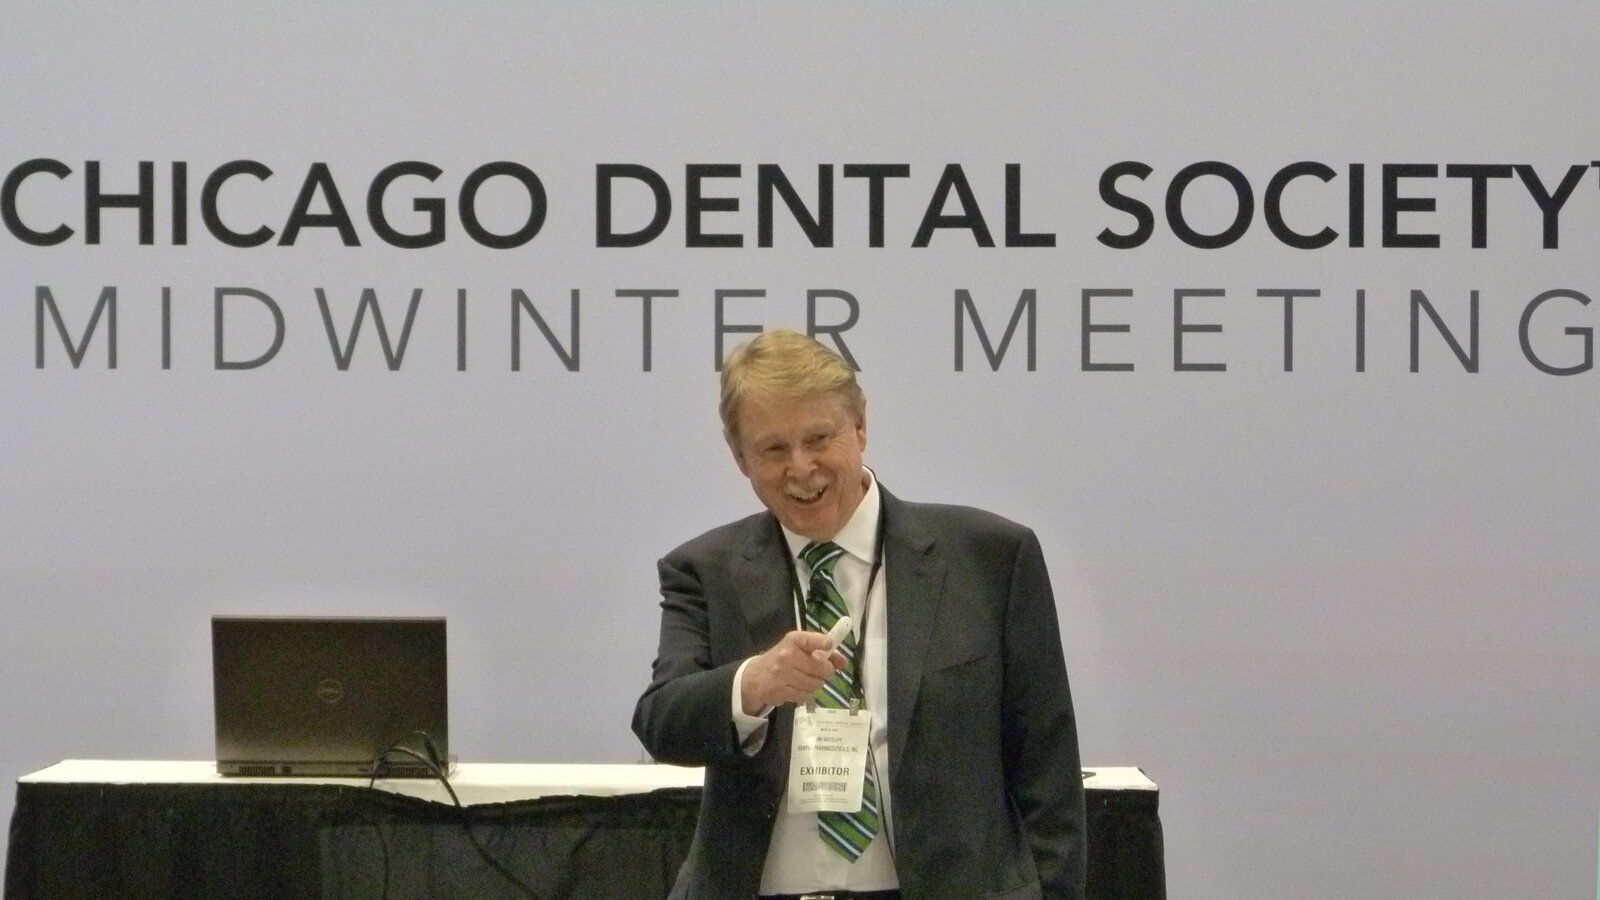 Corporate Learning Theater new at 2020 Chicago Midwinter Meeting